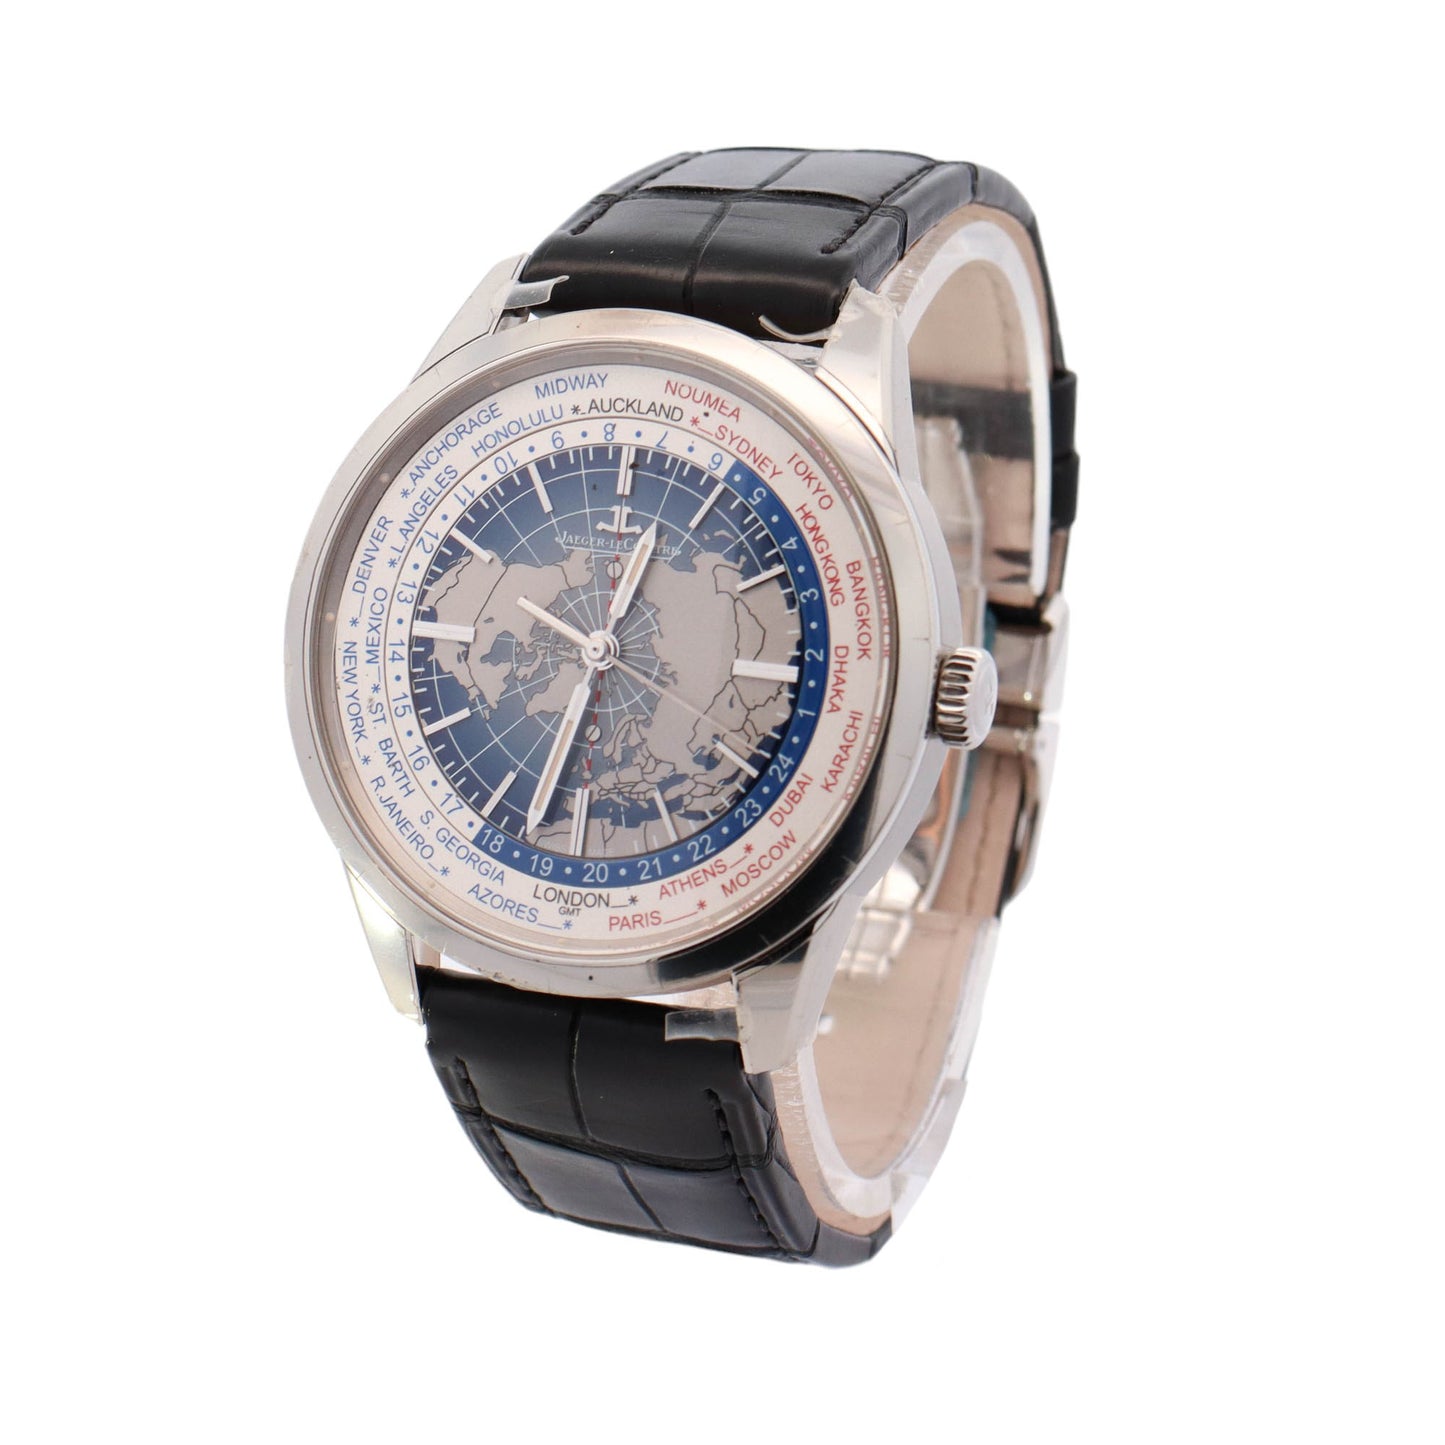 Jaeger-LeCoultre Geophysic Universal Time Stainless Steel 42mm Roman Dial Watch Reference #: Q8108420 - Happy Jewelers Fine Jewelry Lifetime Warranty